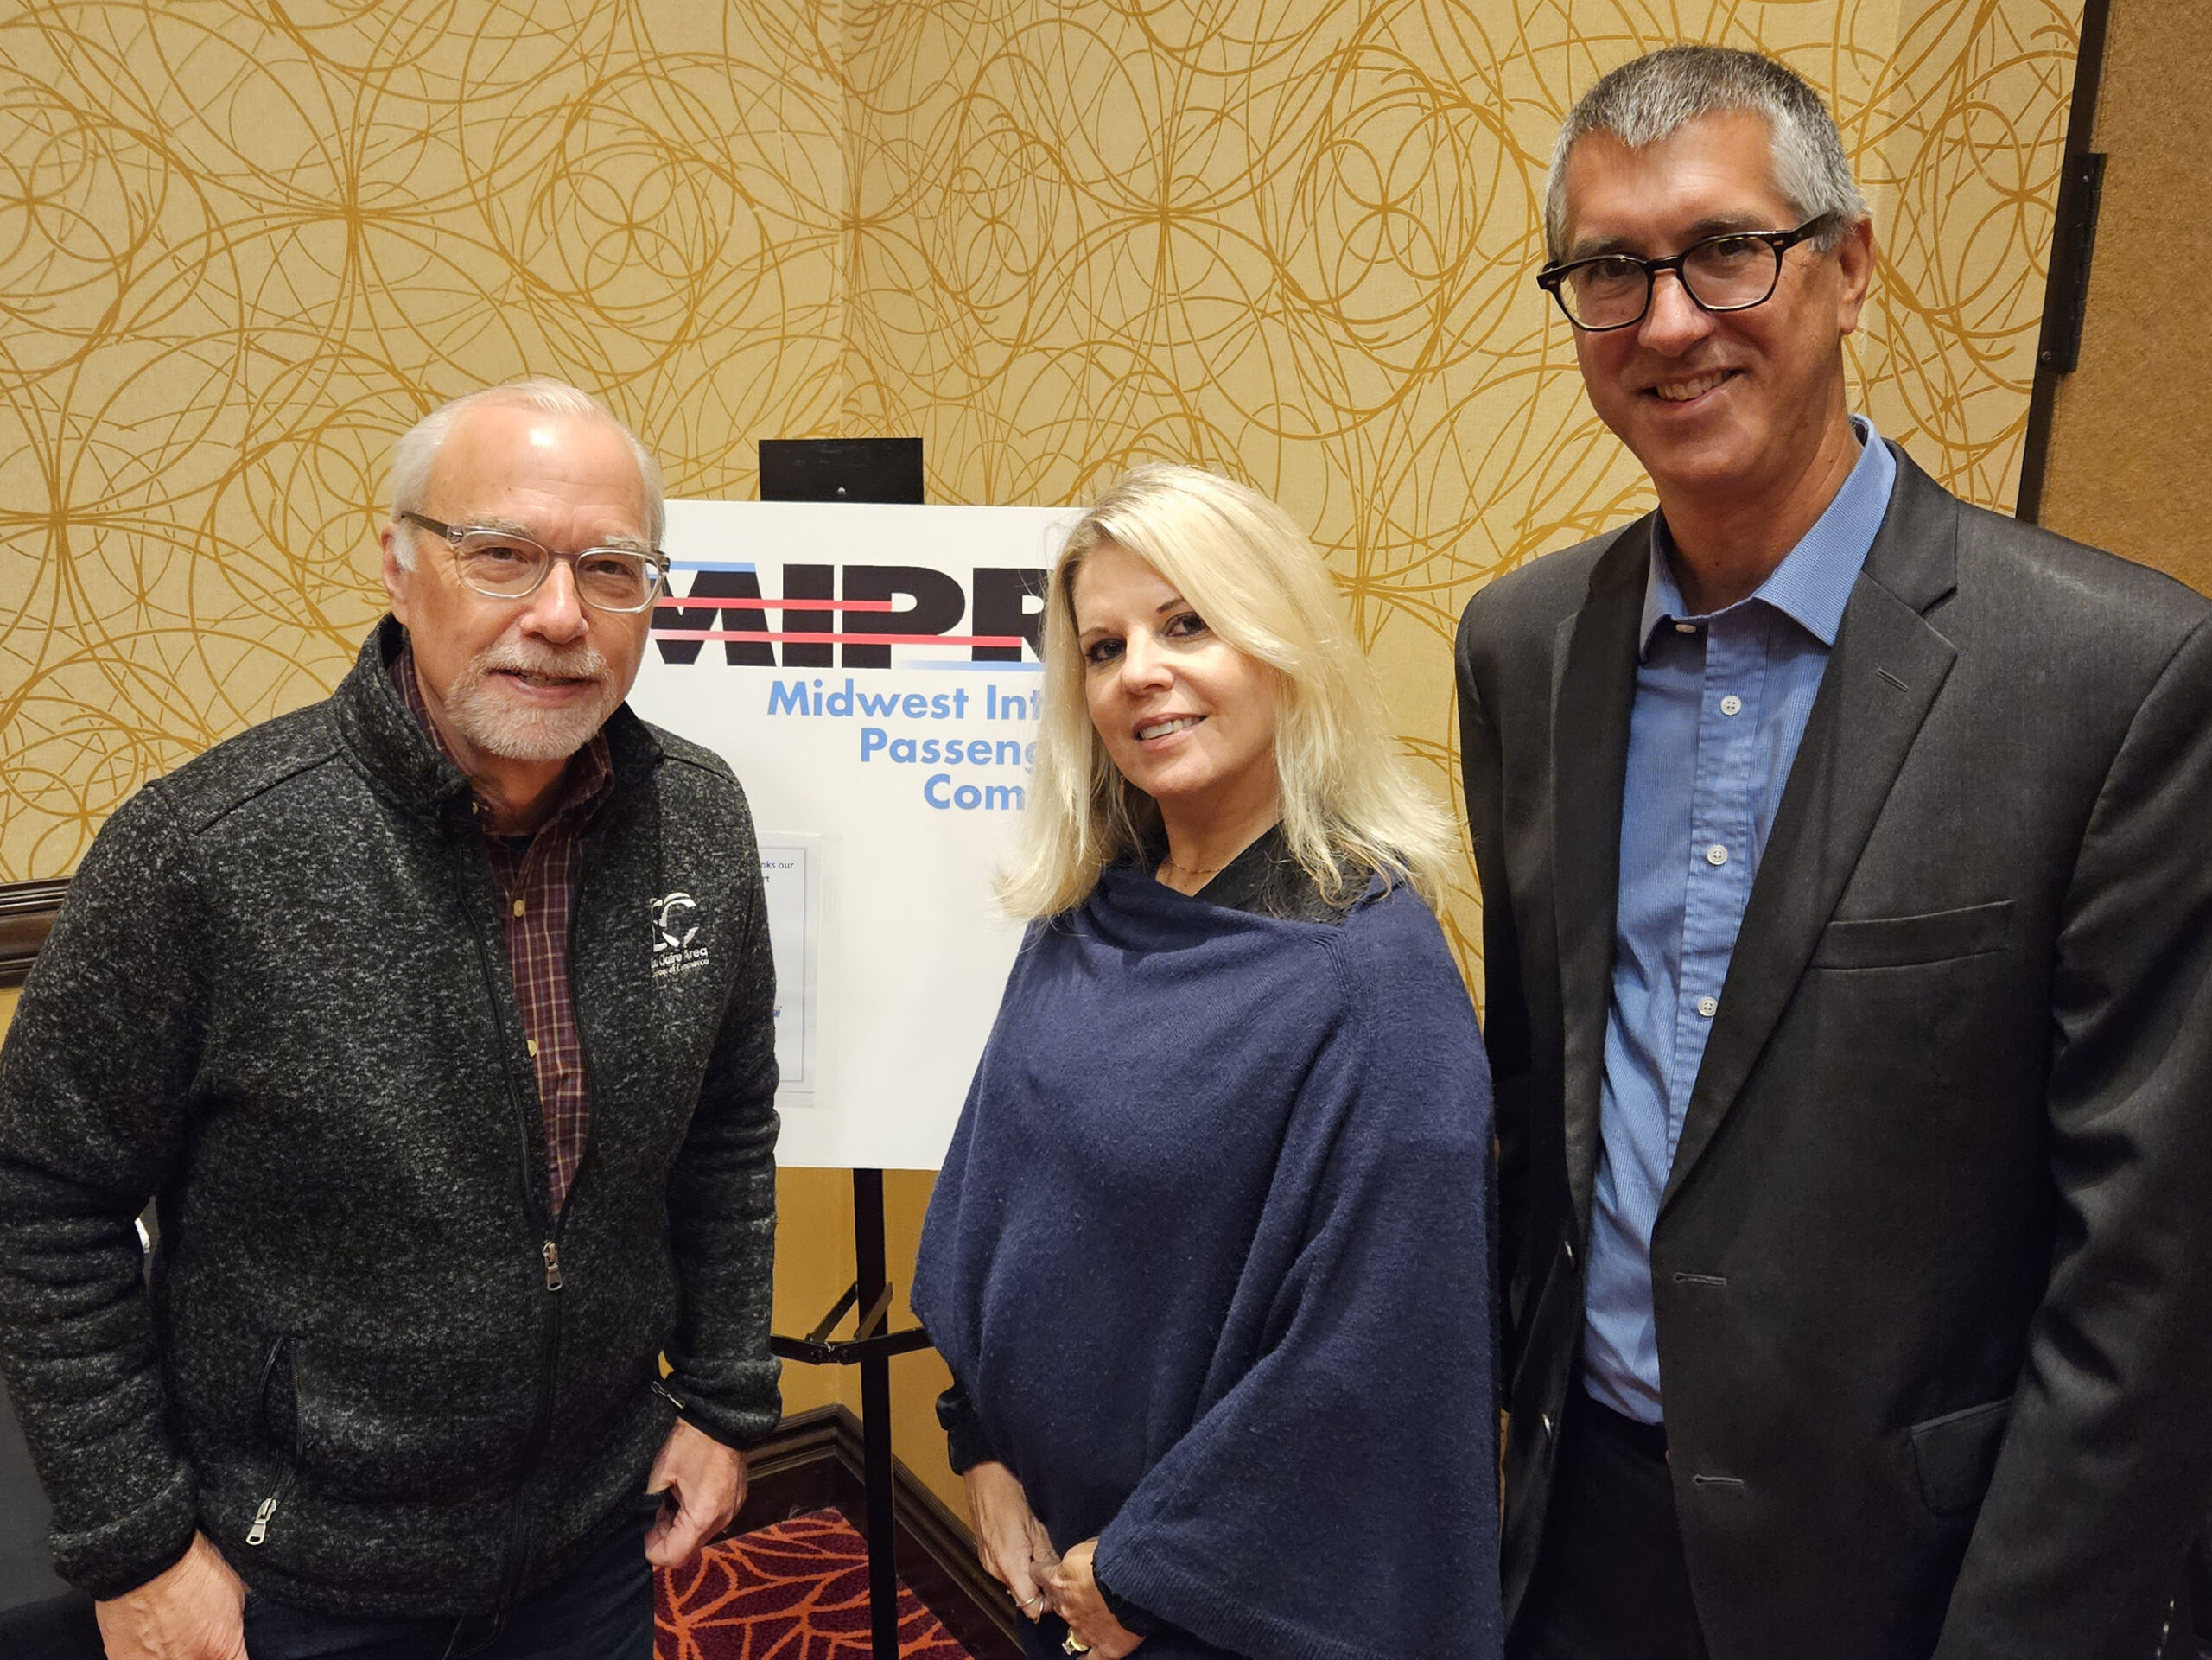 Officers of the Midwest Interstate Passenger Rail Commission, chosen at MIPRC's 2023 Annual Meeting: Beth McCluskey, Illinois, as chair (center); Peter Anastor, Michigan, as vice chair (right); and Scott Rogers, Wisconsin, as financial officer (left).